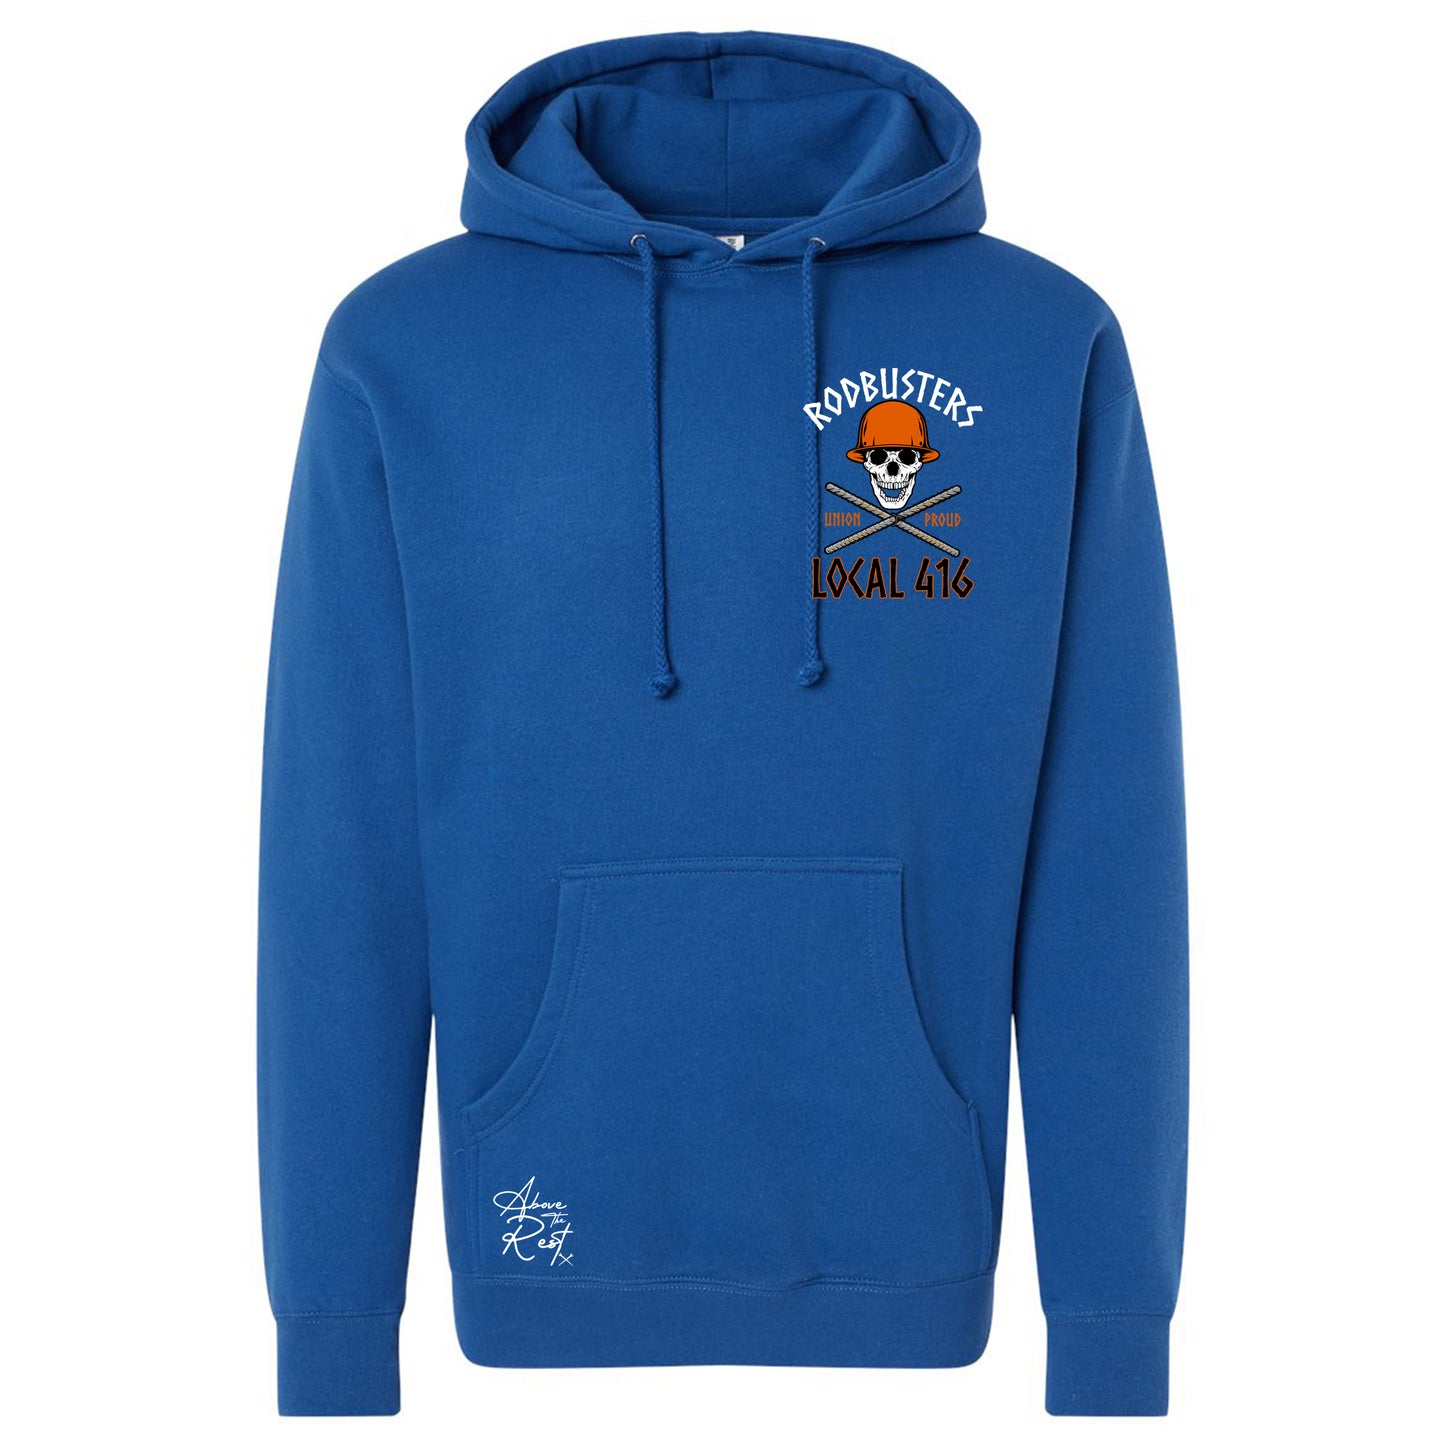 REBAR UNION PROUD PULLOVER HOODIE LOCAL 416